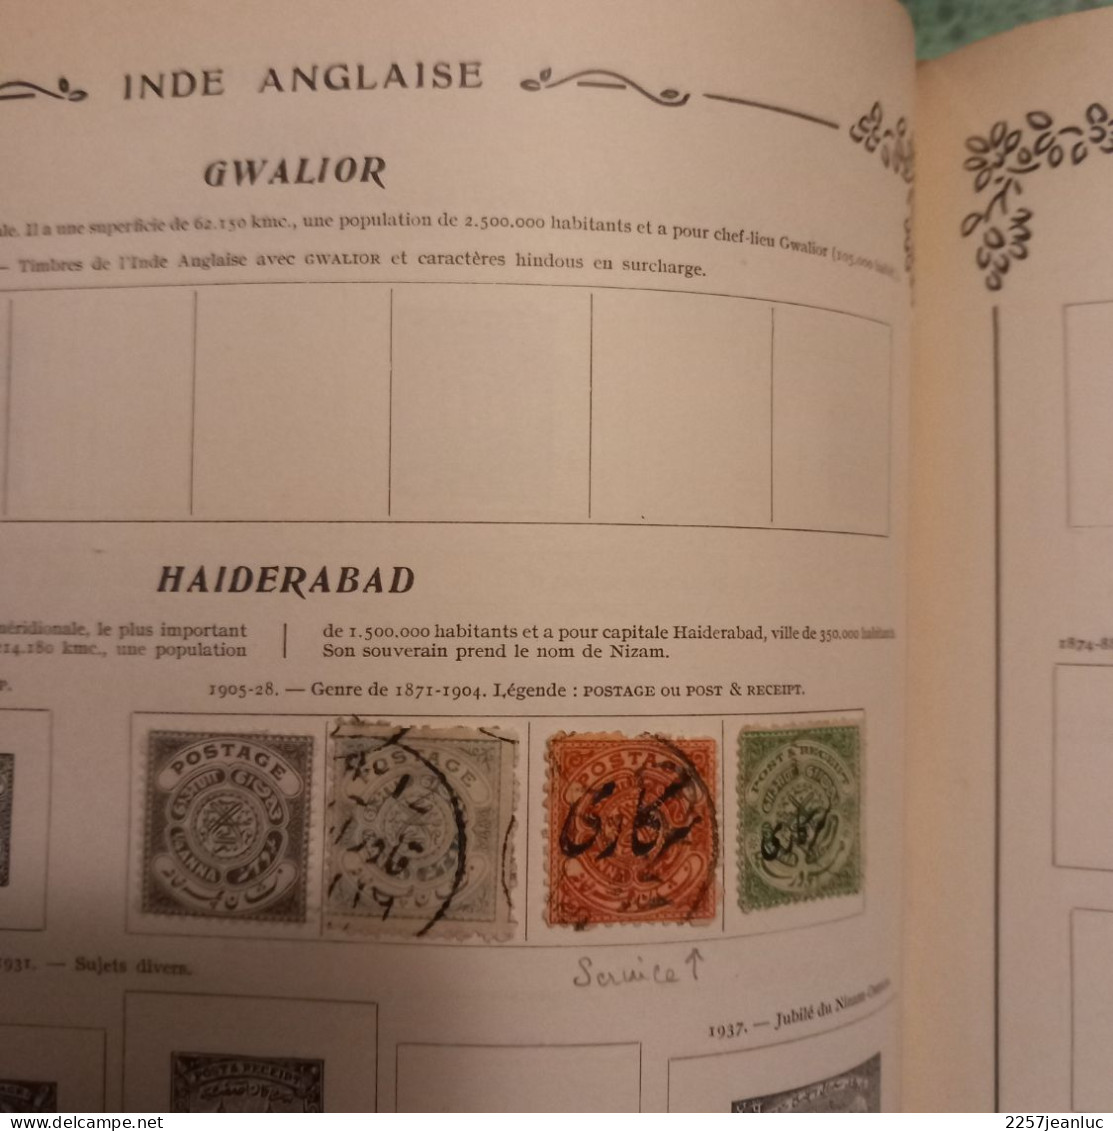 4 Timbres De 1905 à 1928  Indre Anglaise .. - Hyderabad